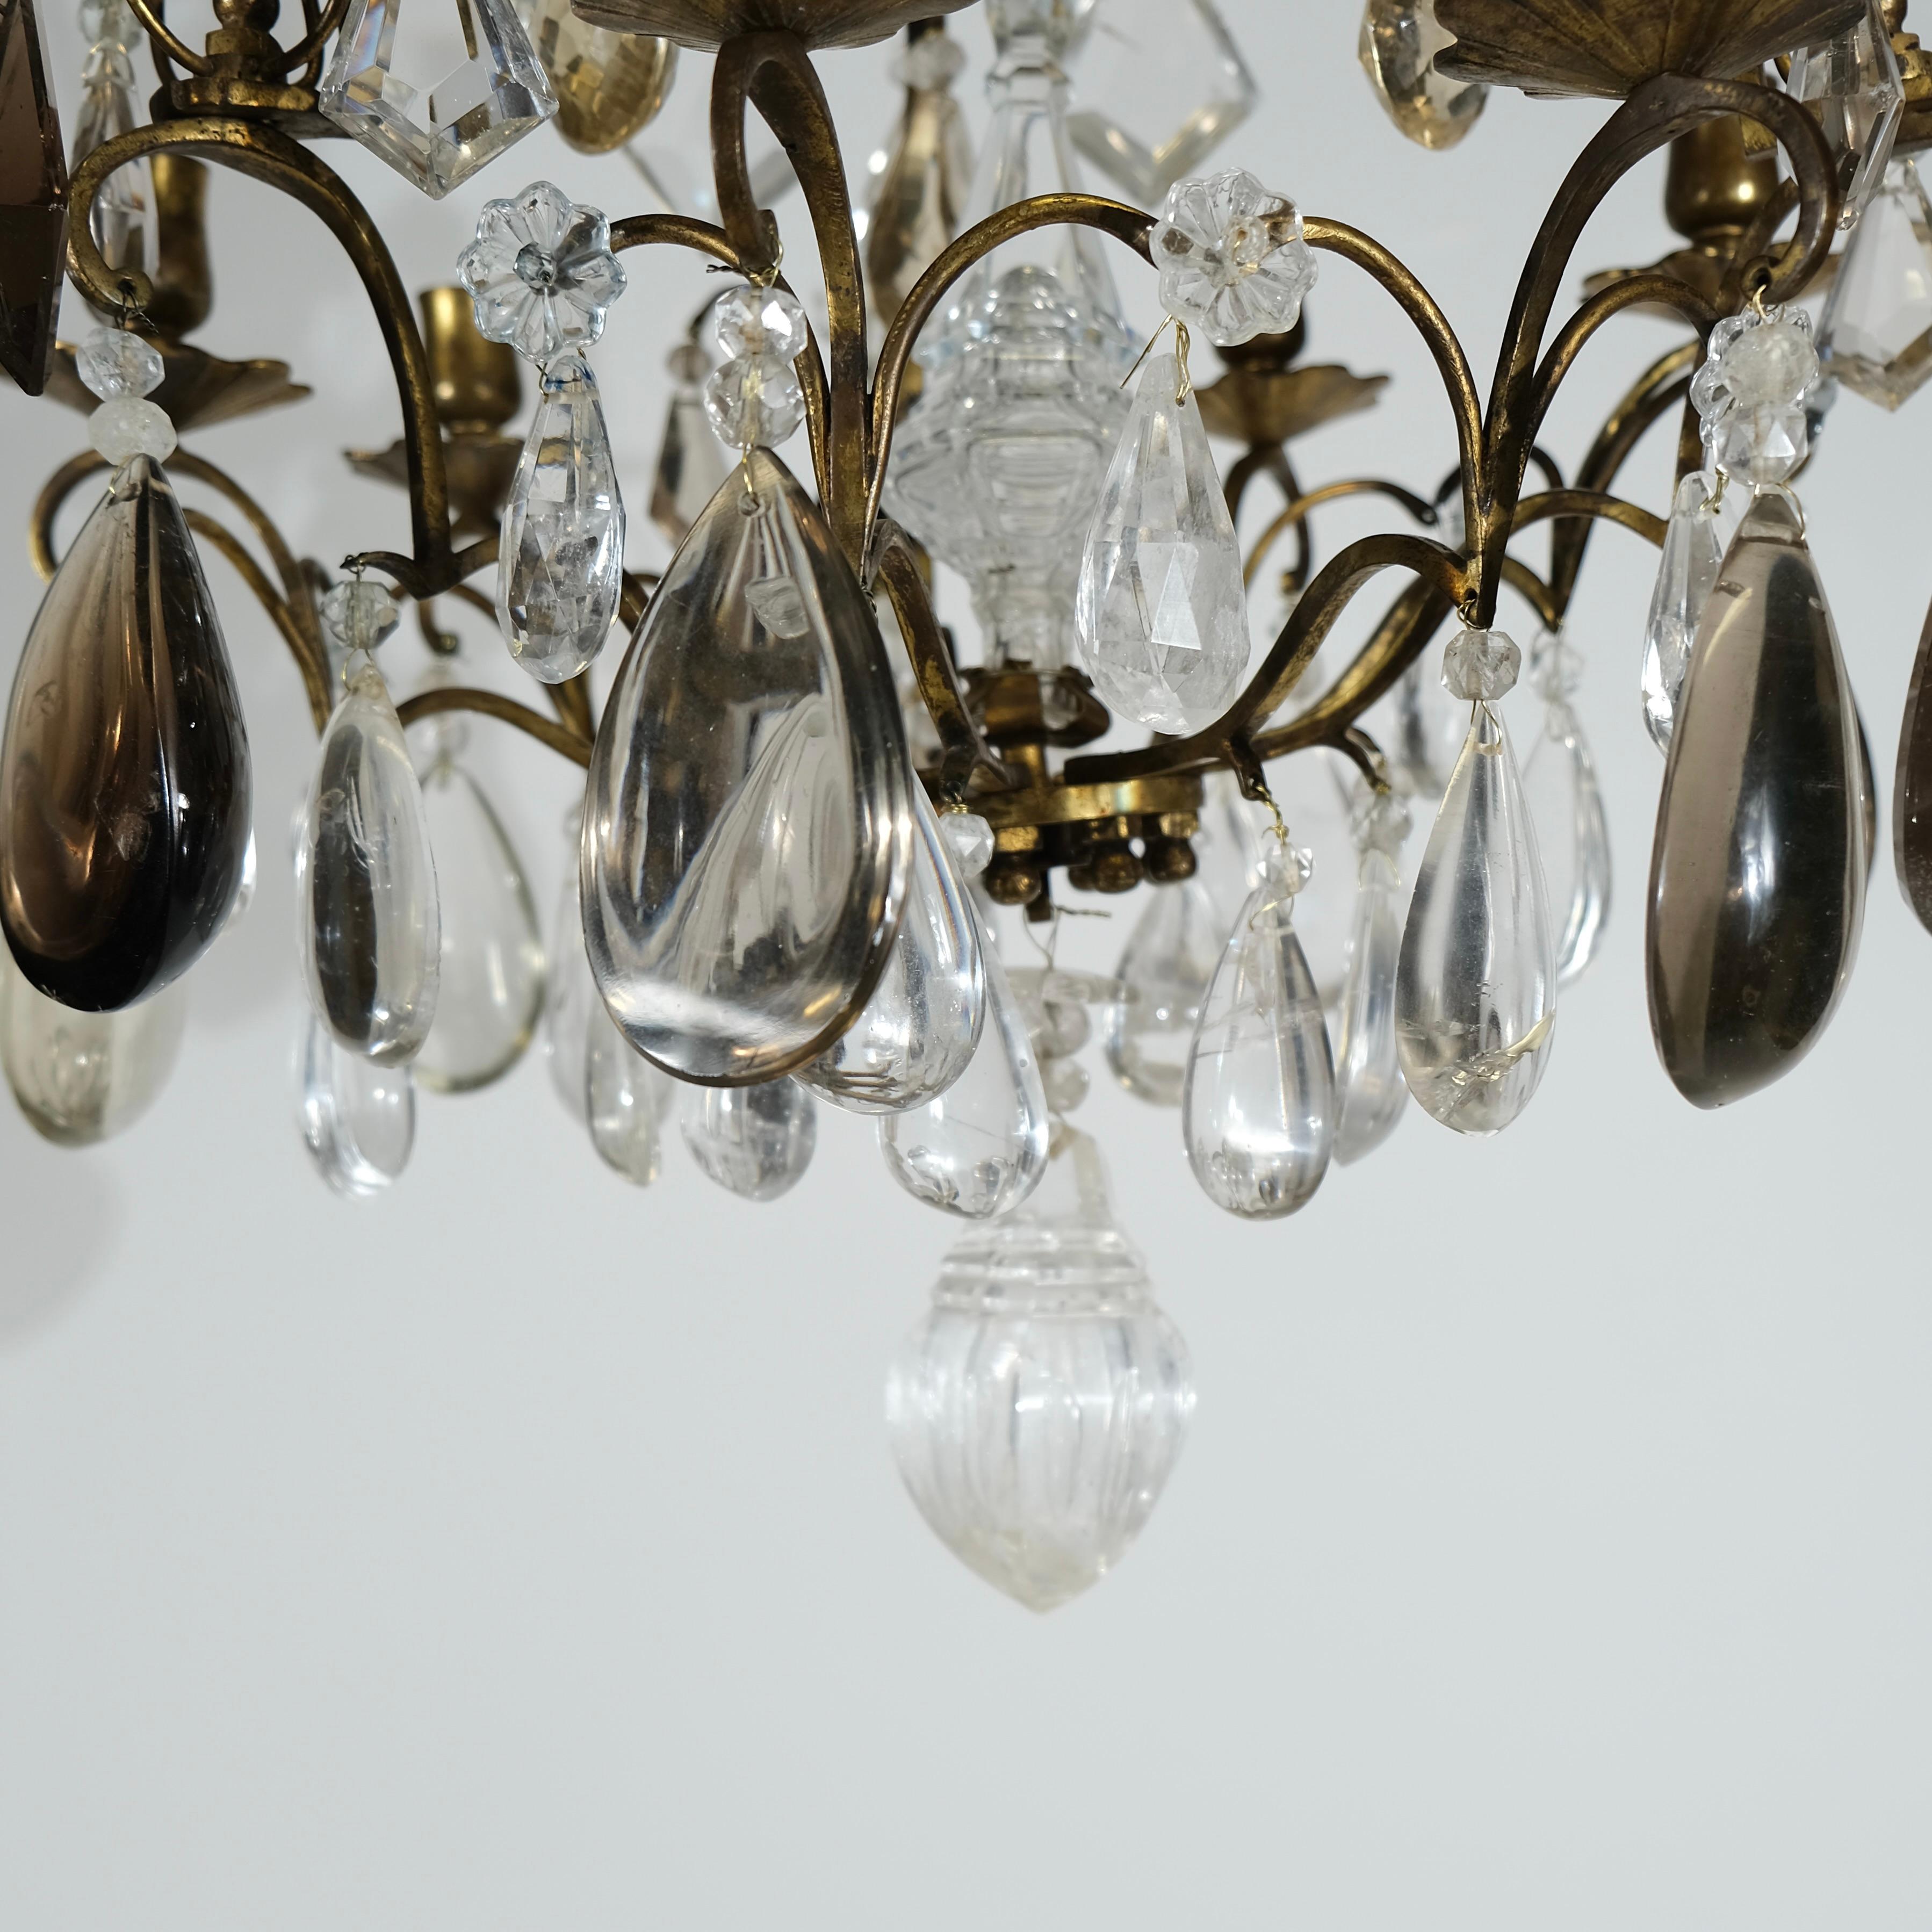 Small Baroque Style Chandelier with Exquisite Rock Crystals. 19th c. 1